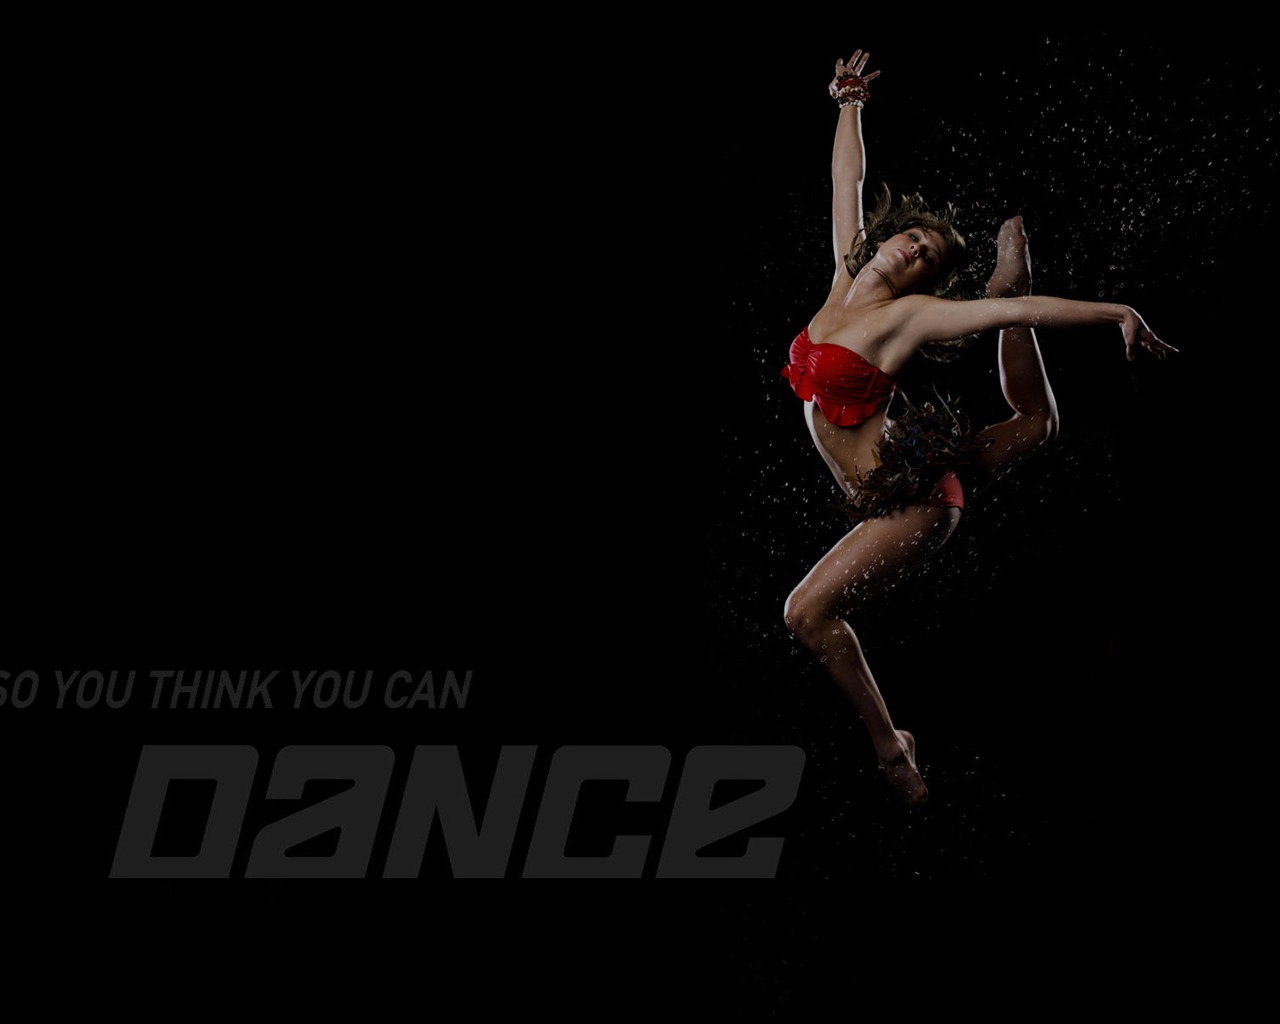 So You Think You Can Dance wallpaper (2) #13 - 1280x1024